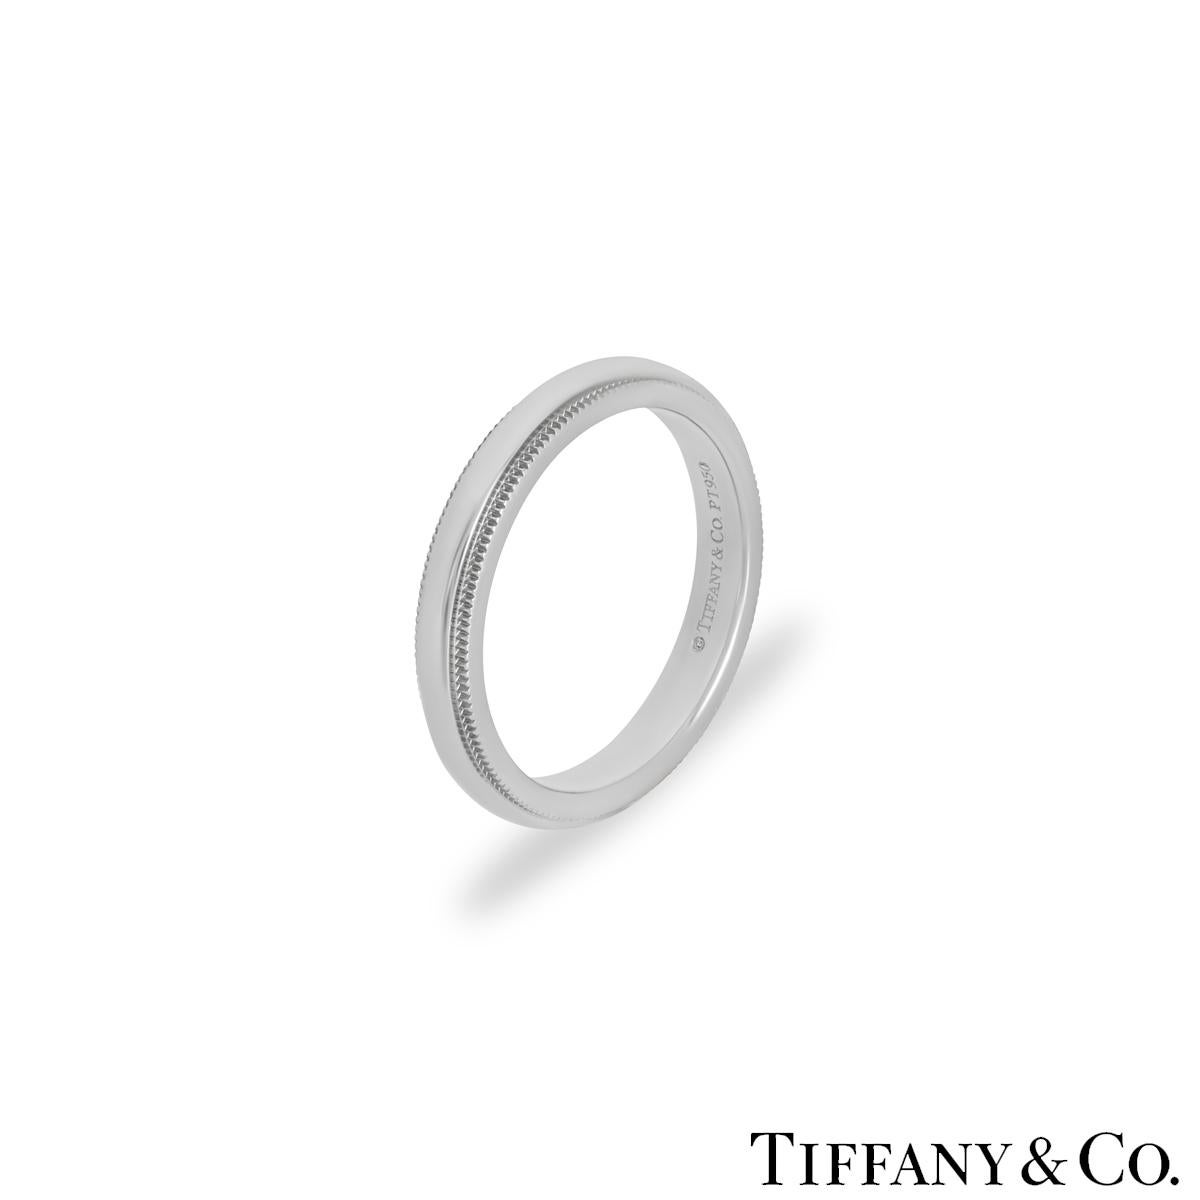 A modern platinum wedding band by Tiffany & Co. from the Tiffany Together collection. The ring features a high polish centre with textured milgrain edges. It measures 3mm in width, is a size UK L½ - EU 51½  and has a gross weight of 5.71